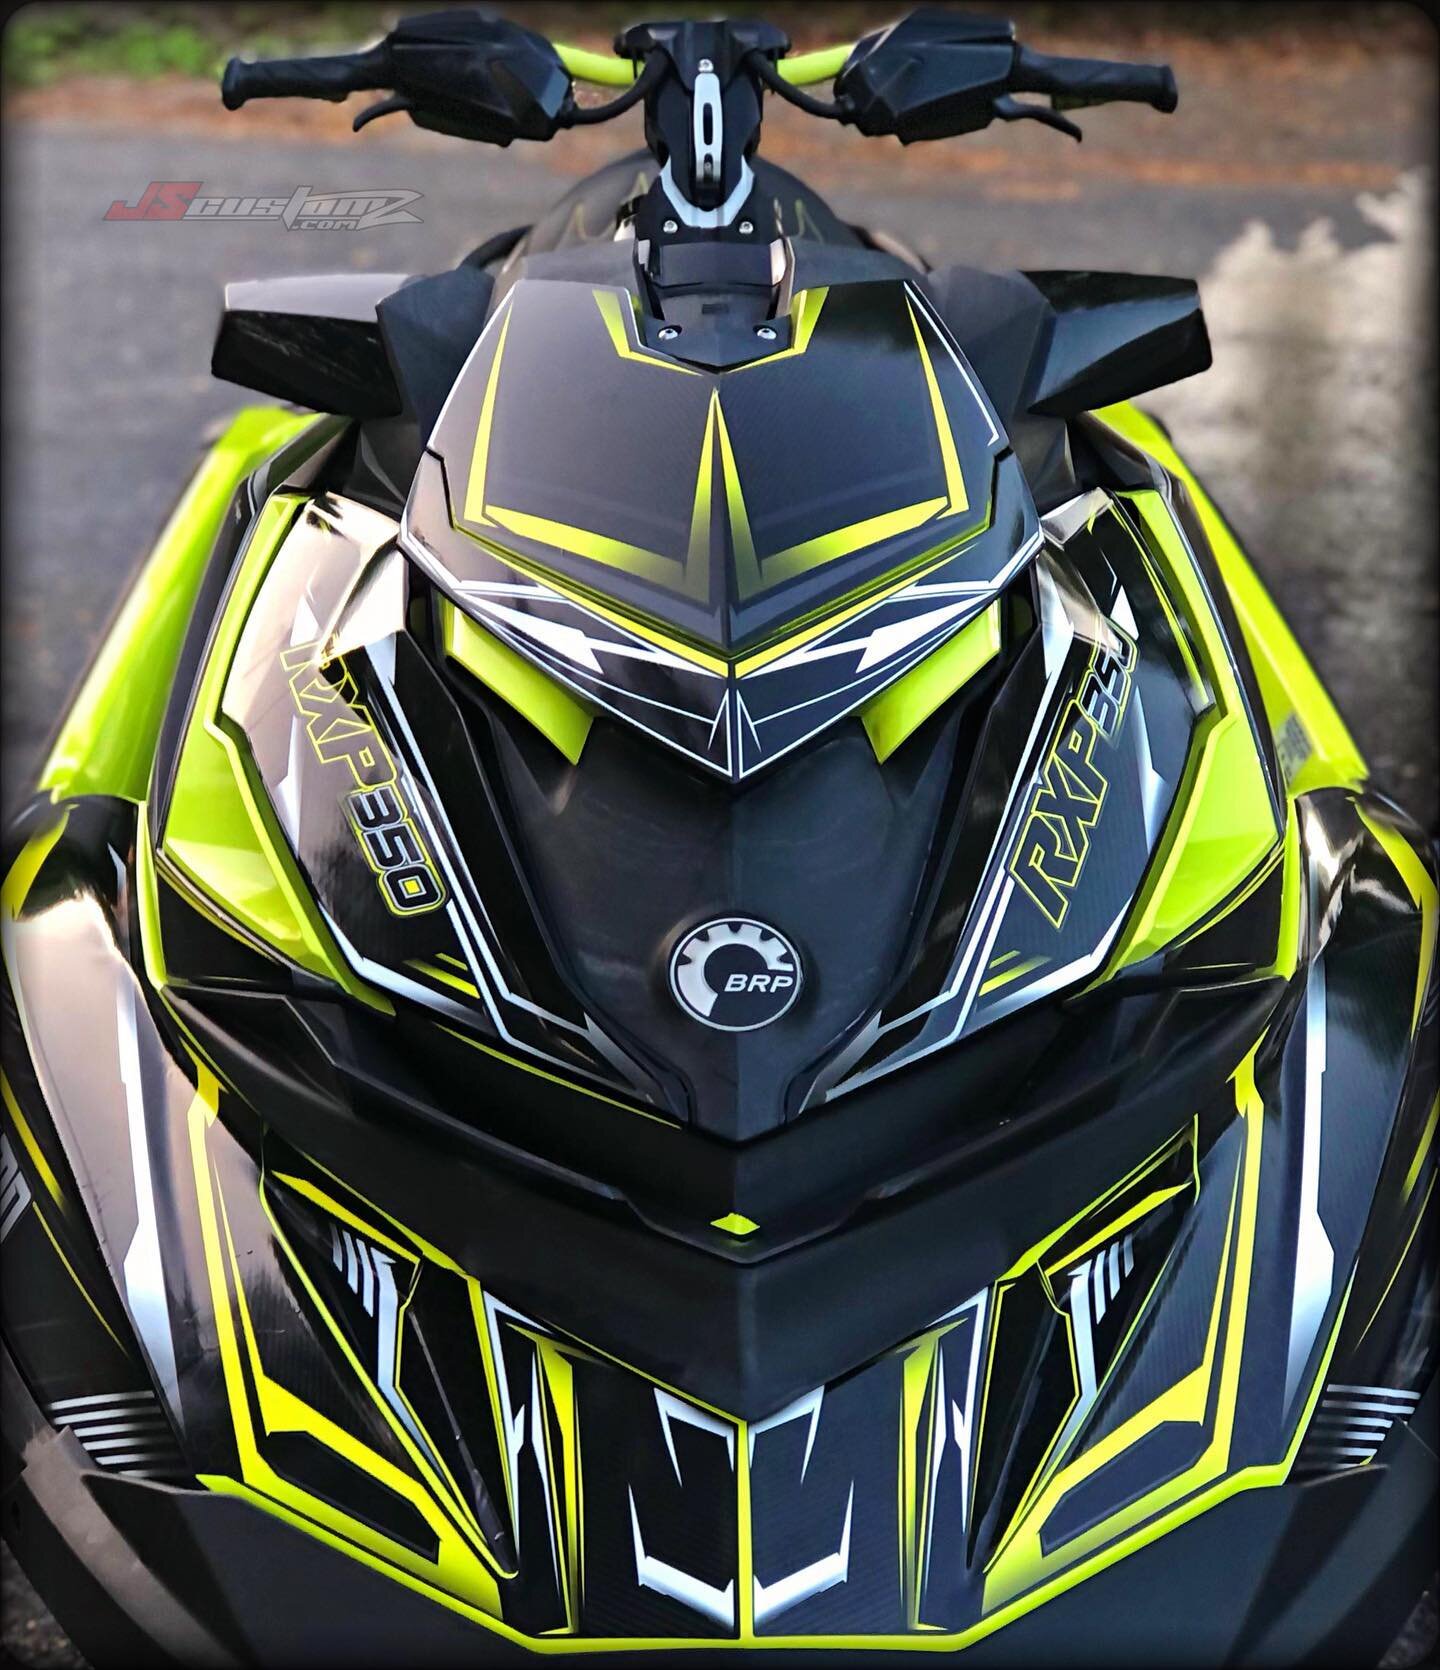 ▪️Black Friday Sale is Here▪️ 
▪️15% Off In All Orders▪️
▪️Only for Limited Time▪️
▪️Use Code &ldquo;BLACK15&rdquo; ▪️

▪️Get your Custom #GraphicKits for SEADOO YAMAHA &amp; KAWASAKI Models, Vassel Registrations▪️Custom Work▪️Top Quality Materials▪️